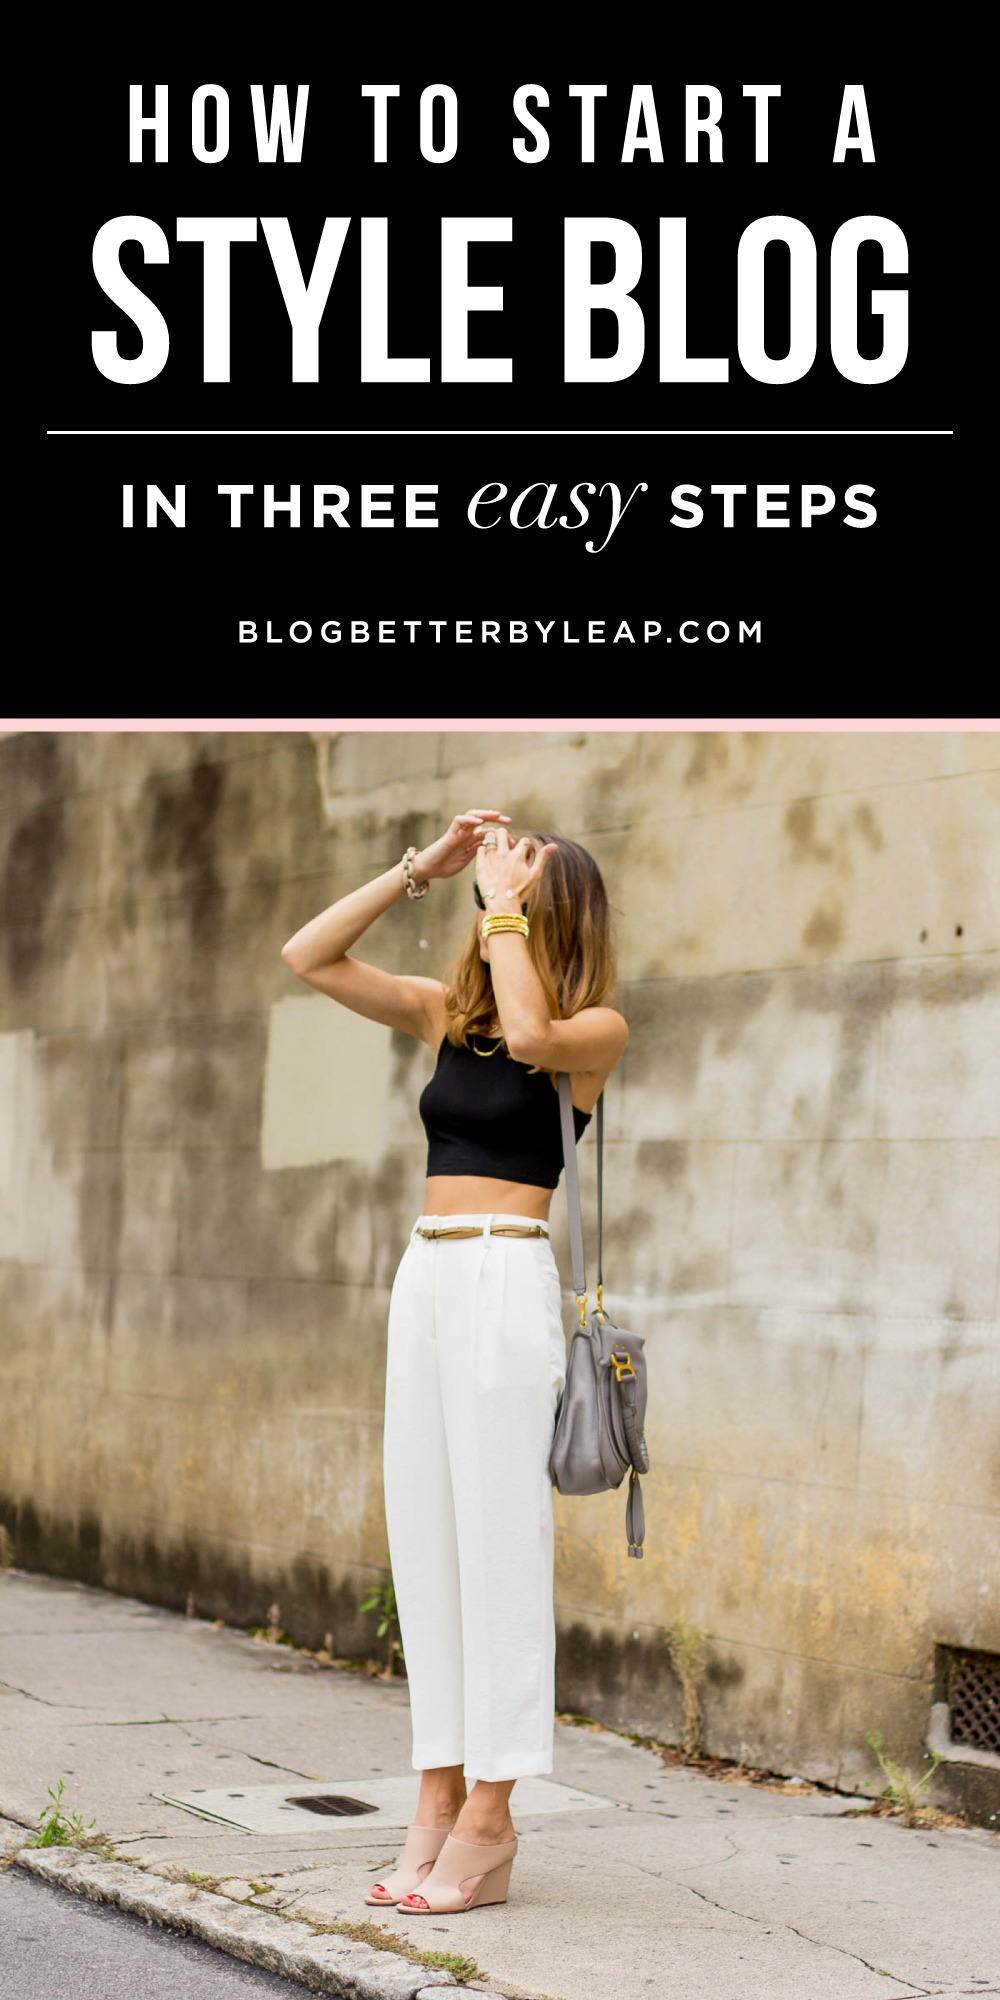 How to Start a Style Blog in Three Easy Steps — via @TheFoxandShe | www.blogbetterbyleap.com